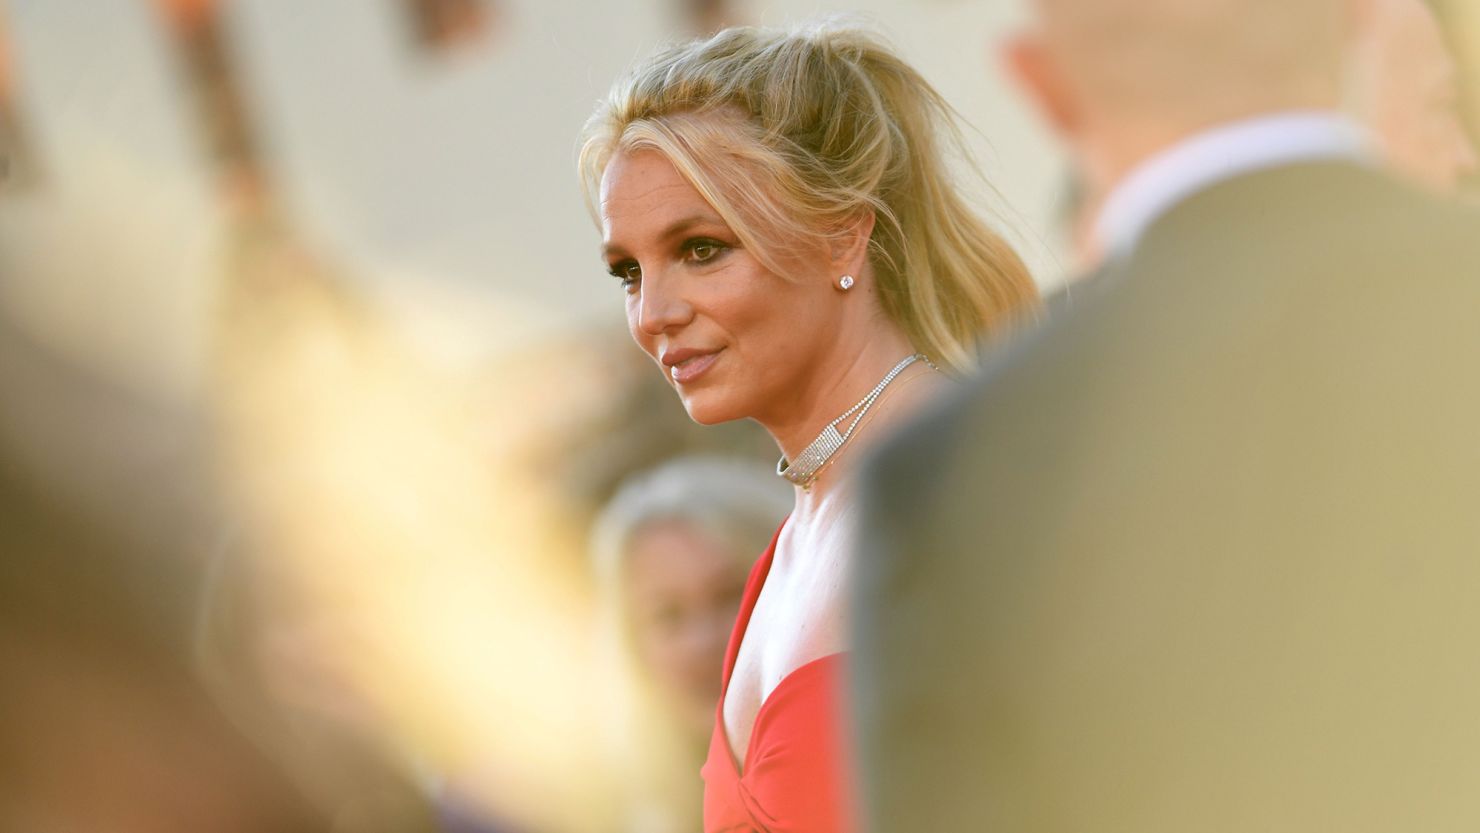 Britney Spears, shown here in 2019, has requested her father be removed as co-conservator of her estate.